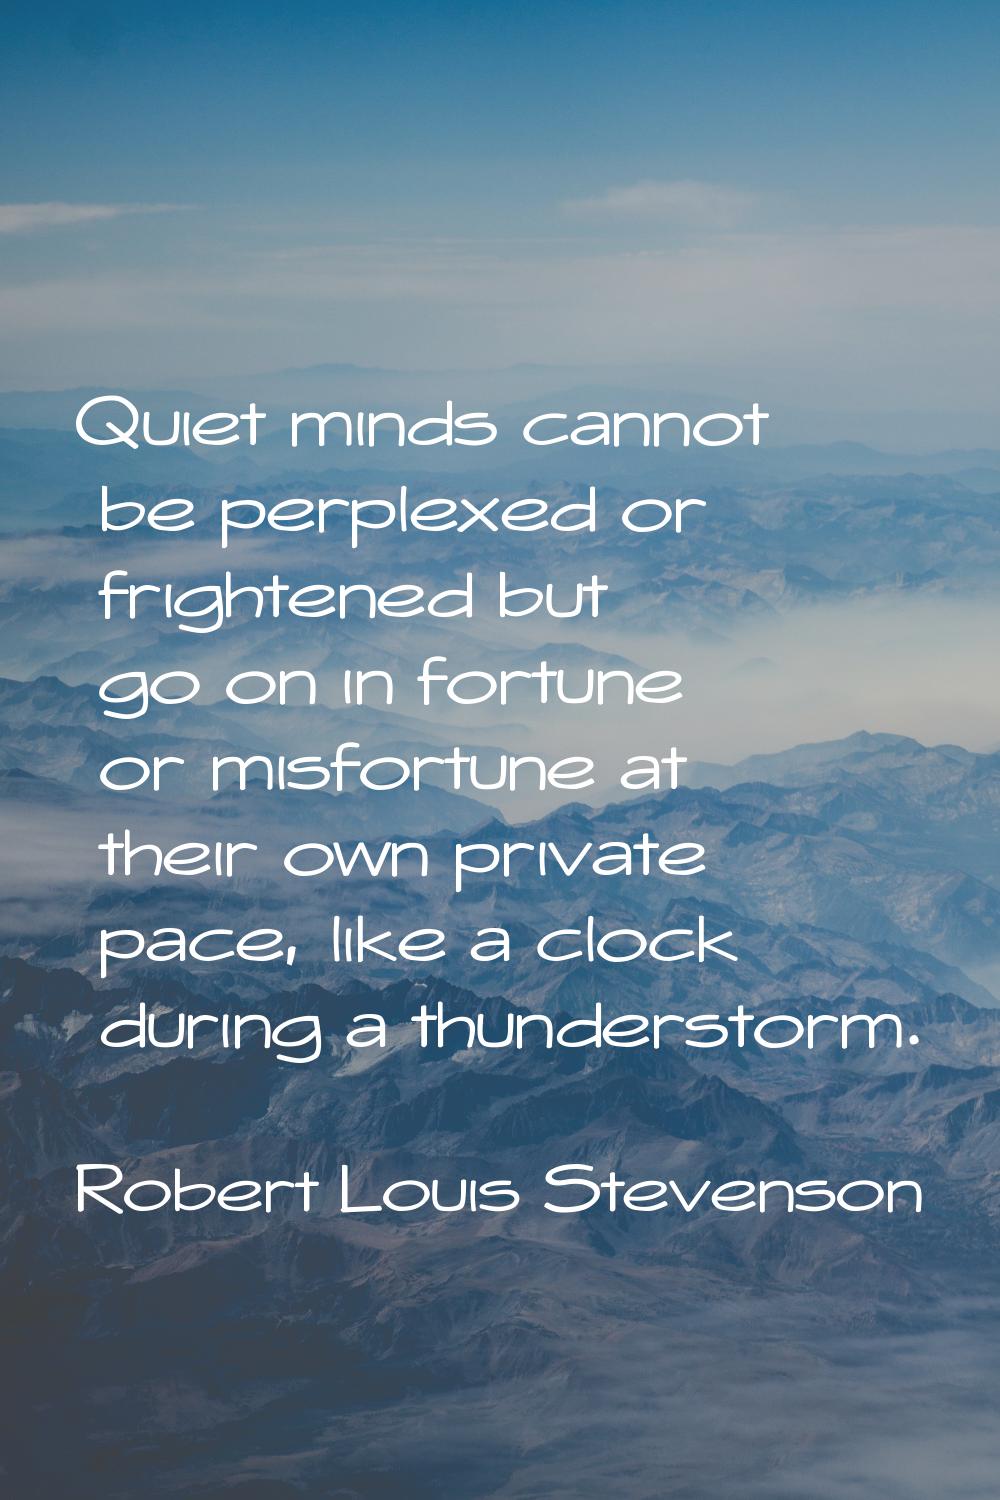 Quiet minds cannot be perplexed or frightened but go on in fortune or misfortune at their own priva